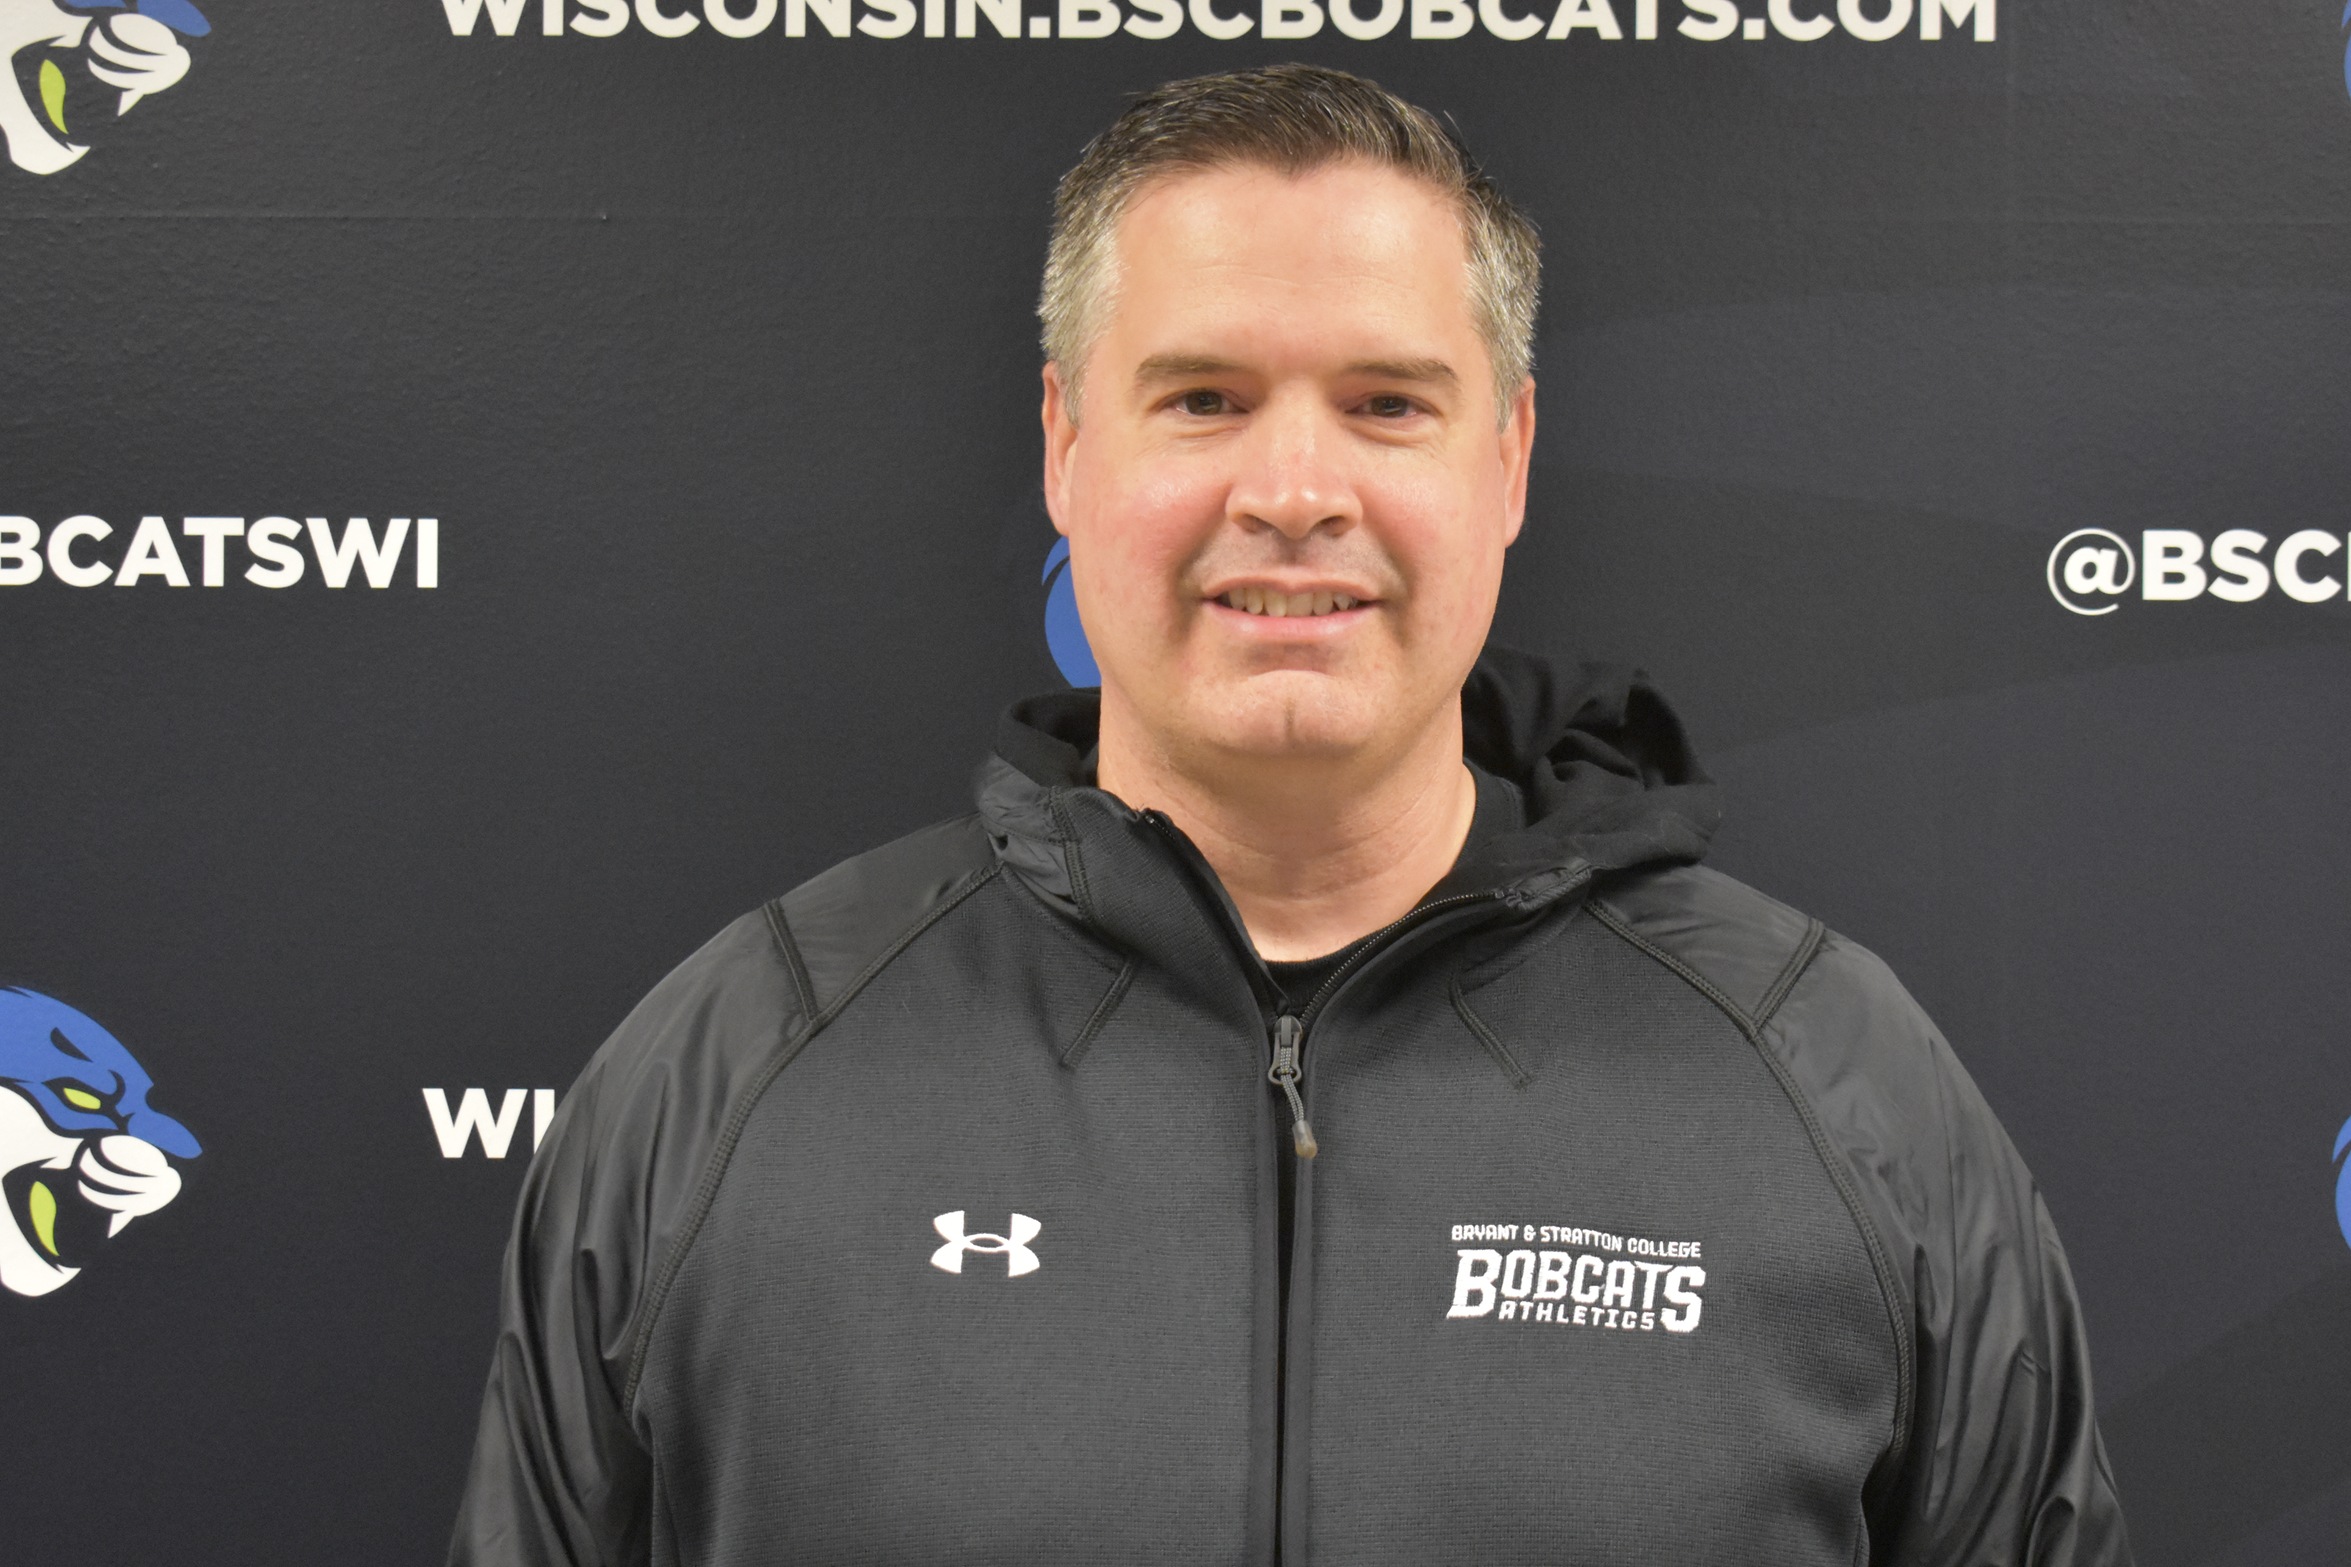 Todd Gray Named Inaugural Men’s Volleyball Coach at Bryant & Stratton College – Wisconsin